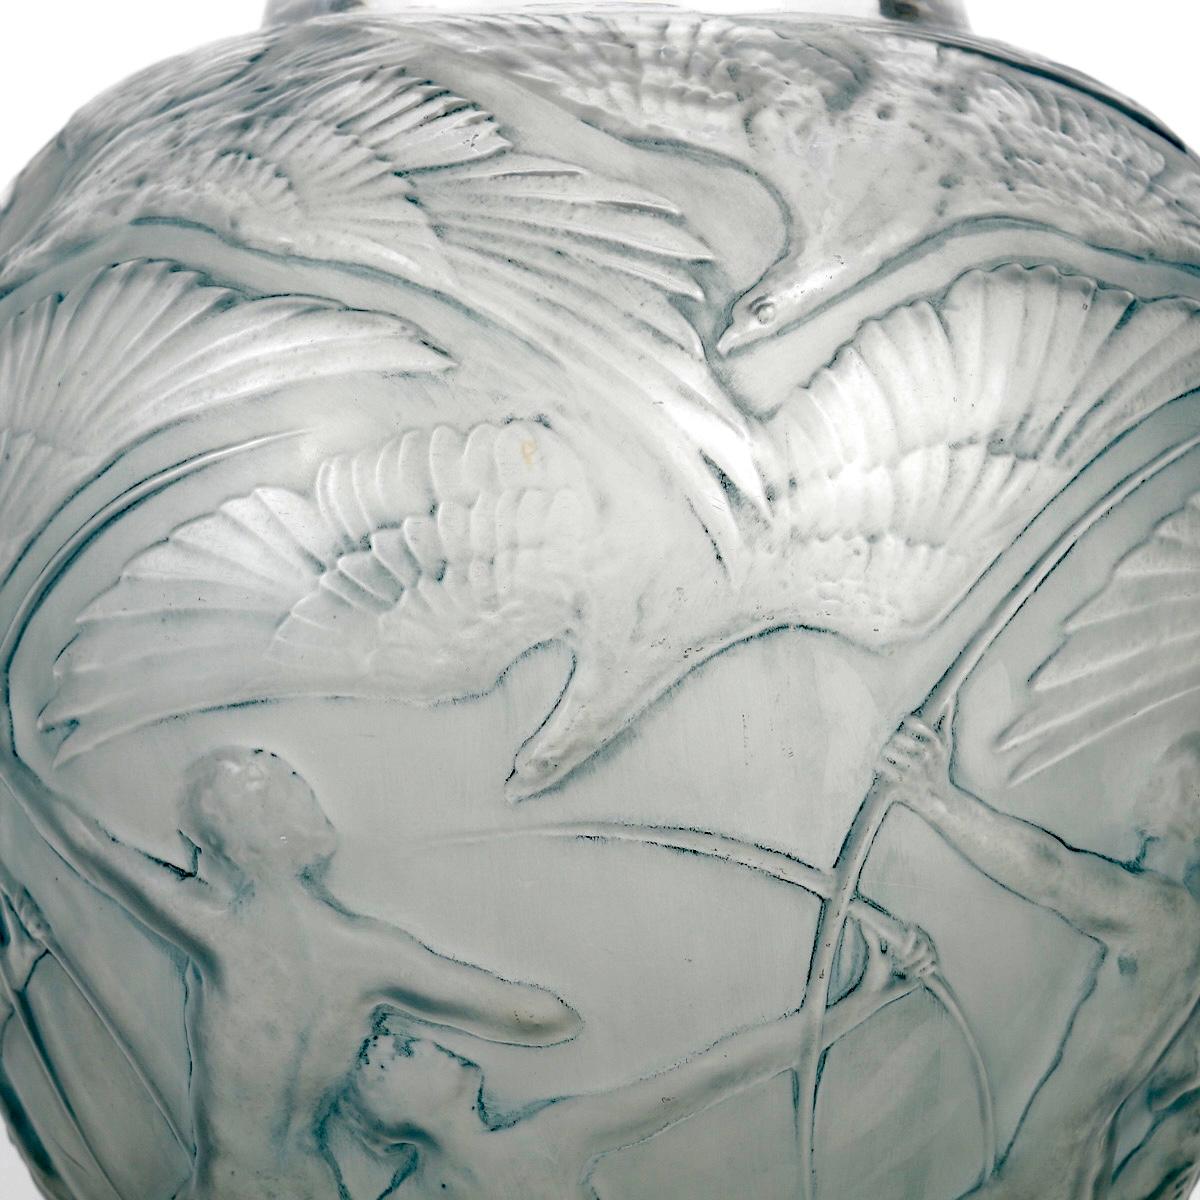 Molded 1921 René Lalique Vase Archers Frosted Glass with Blue Patina